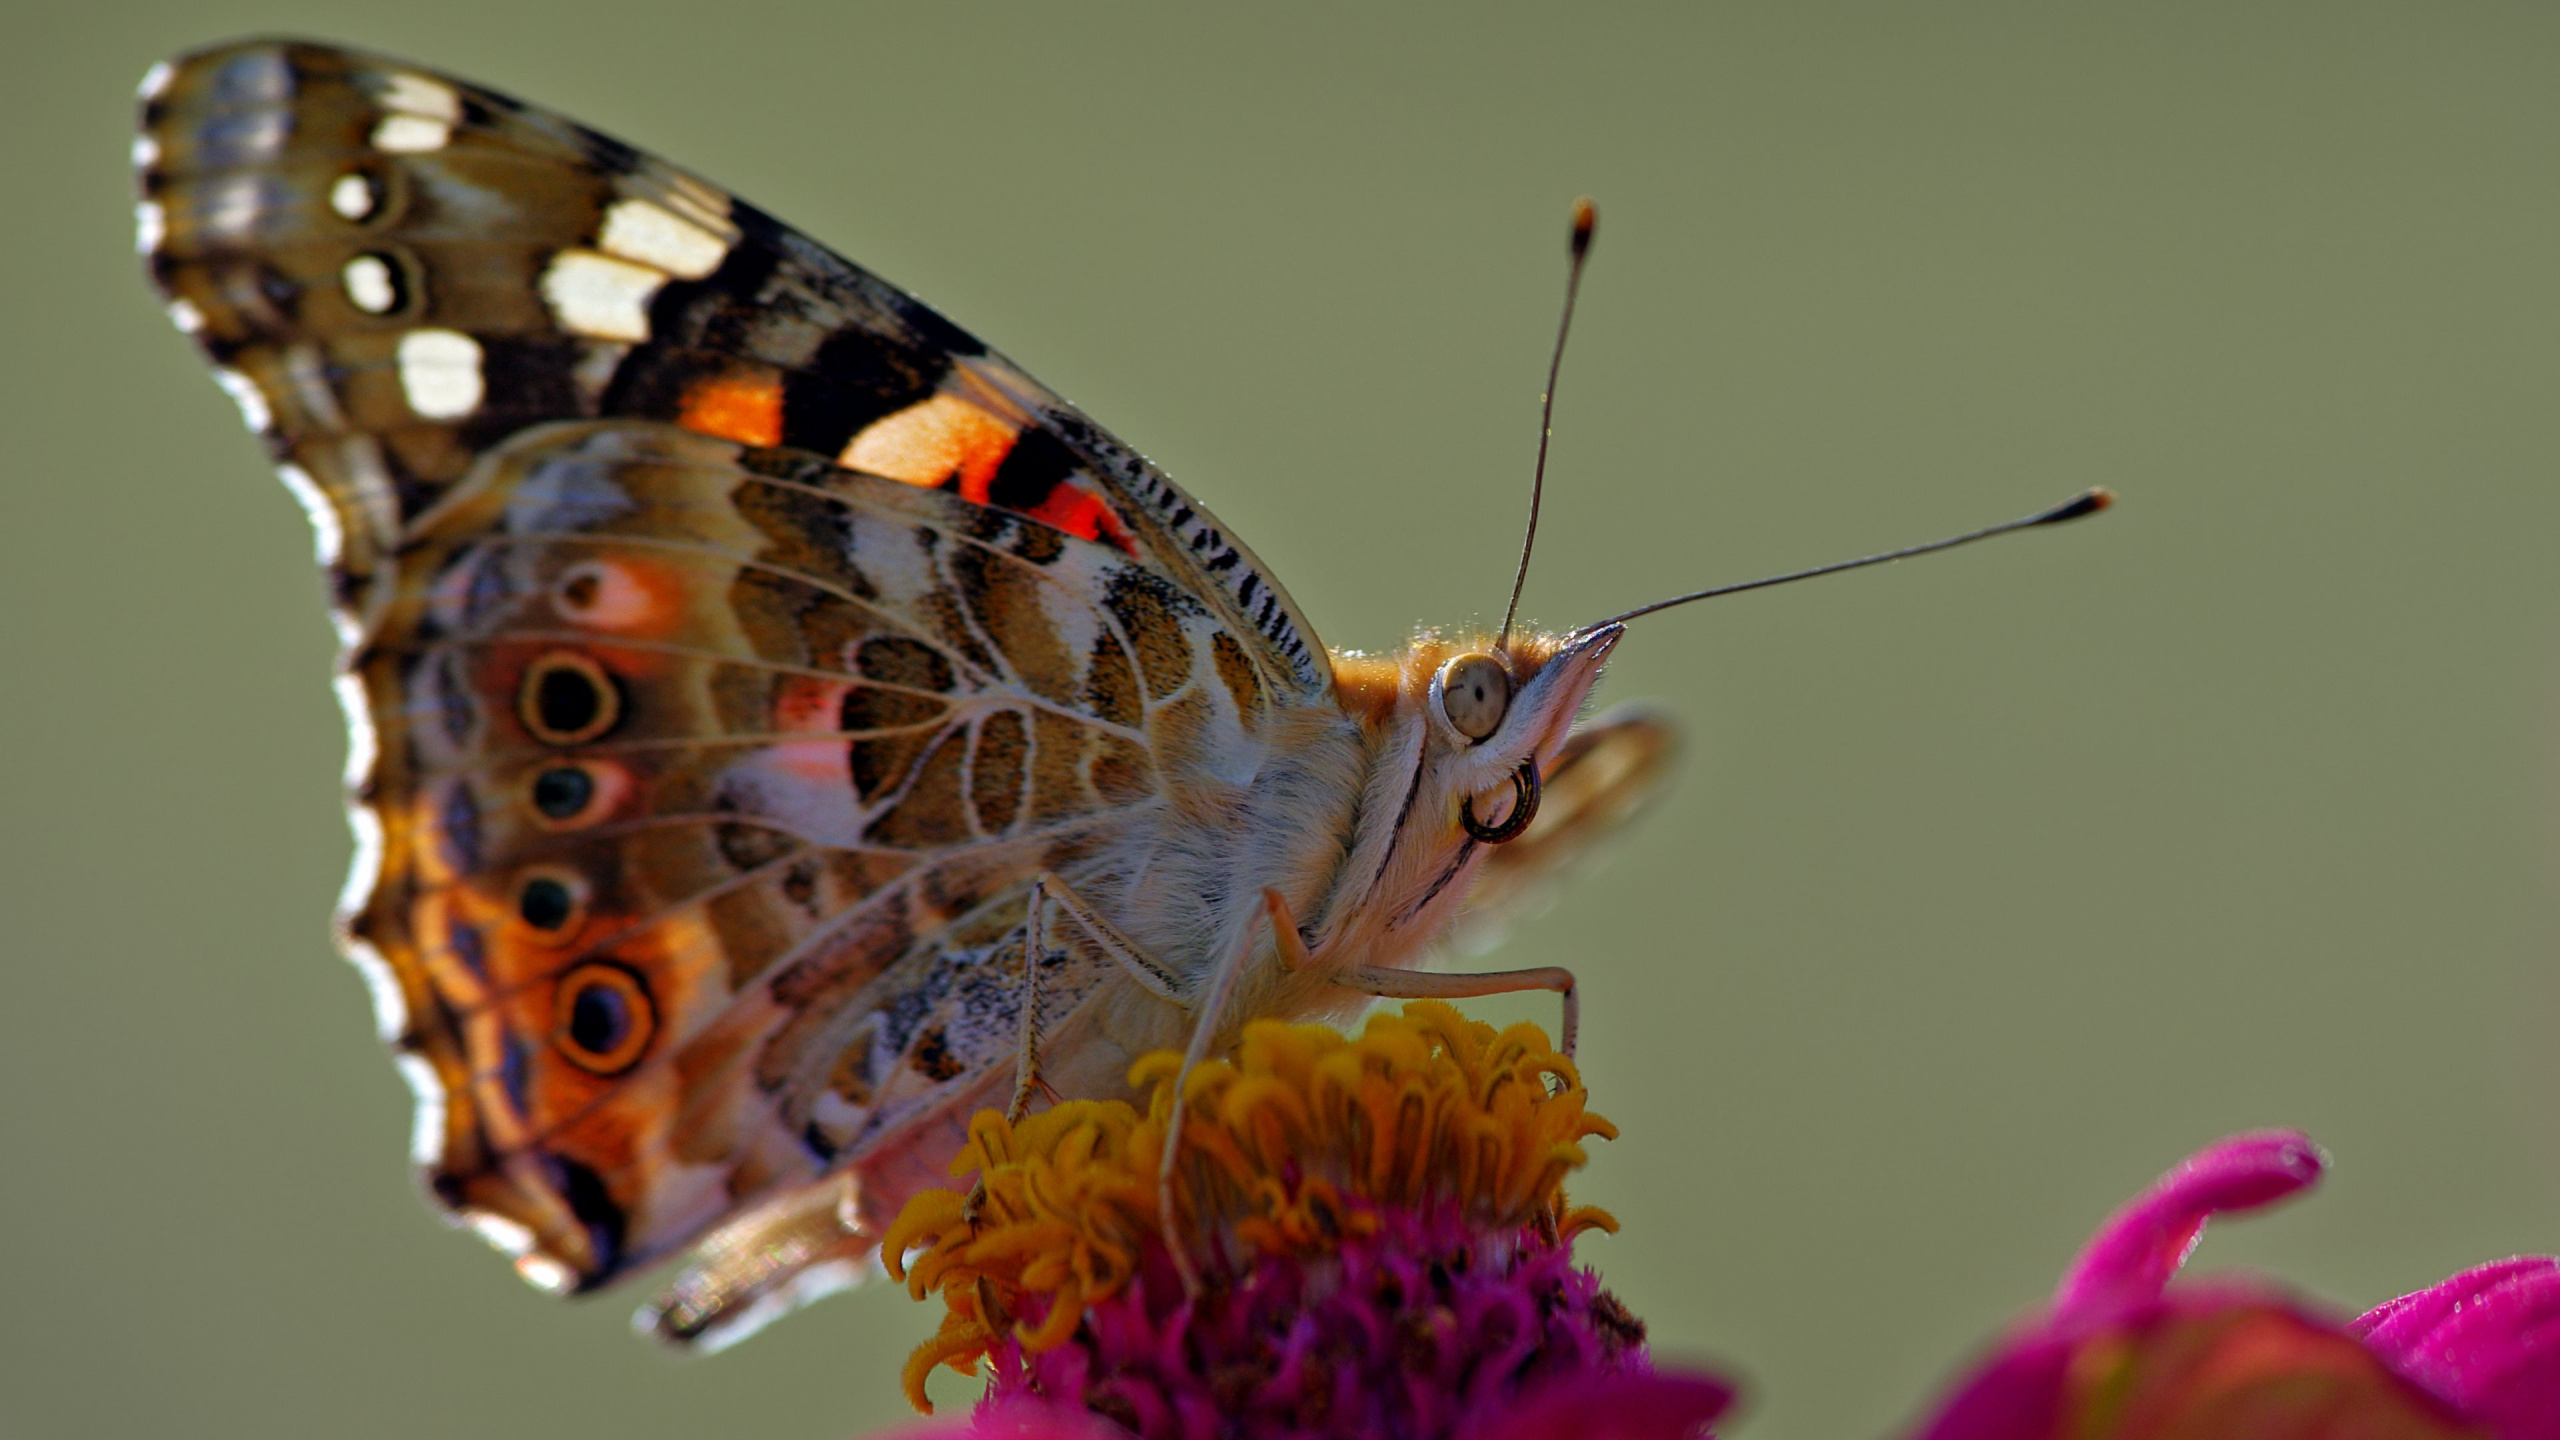 Painted Lady Butterfly Perched on Purple Flower in Close up Photography During Daytime. Wallpaper in 2560x1440 Resolution